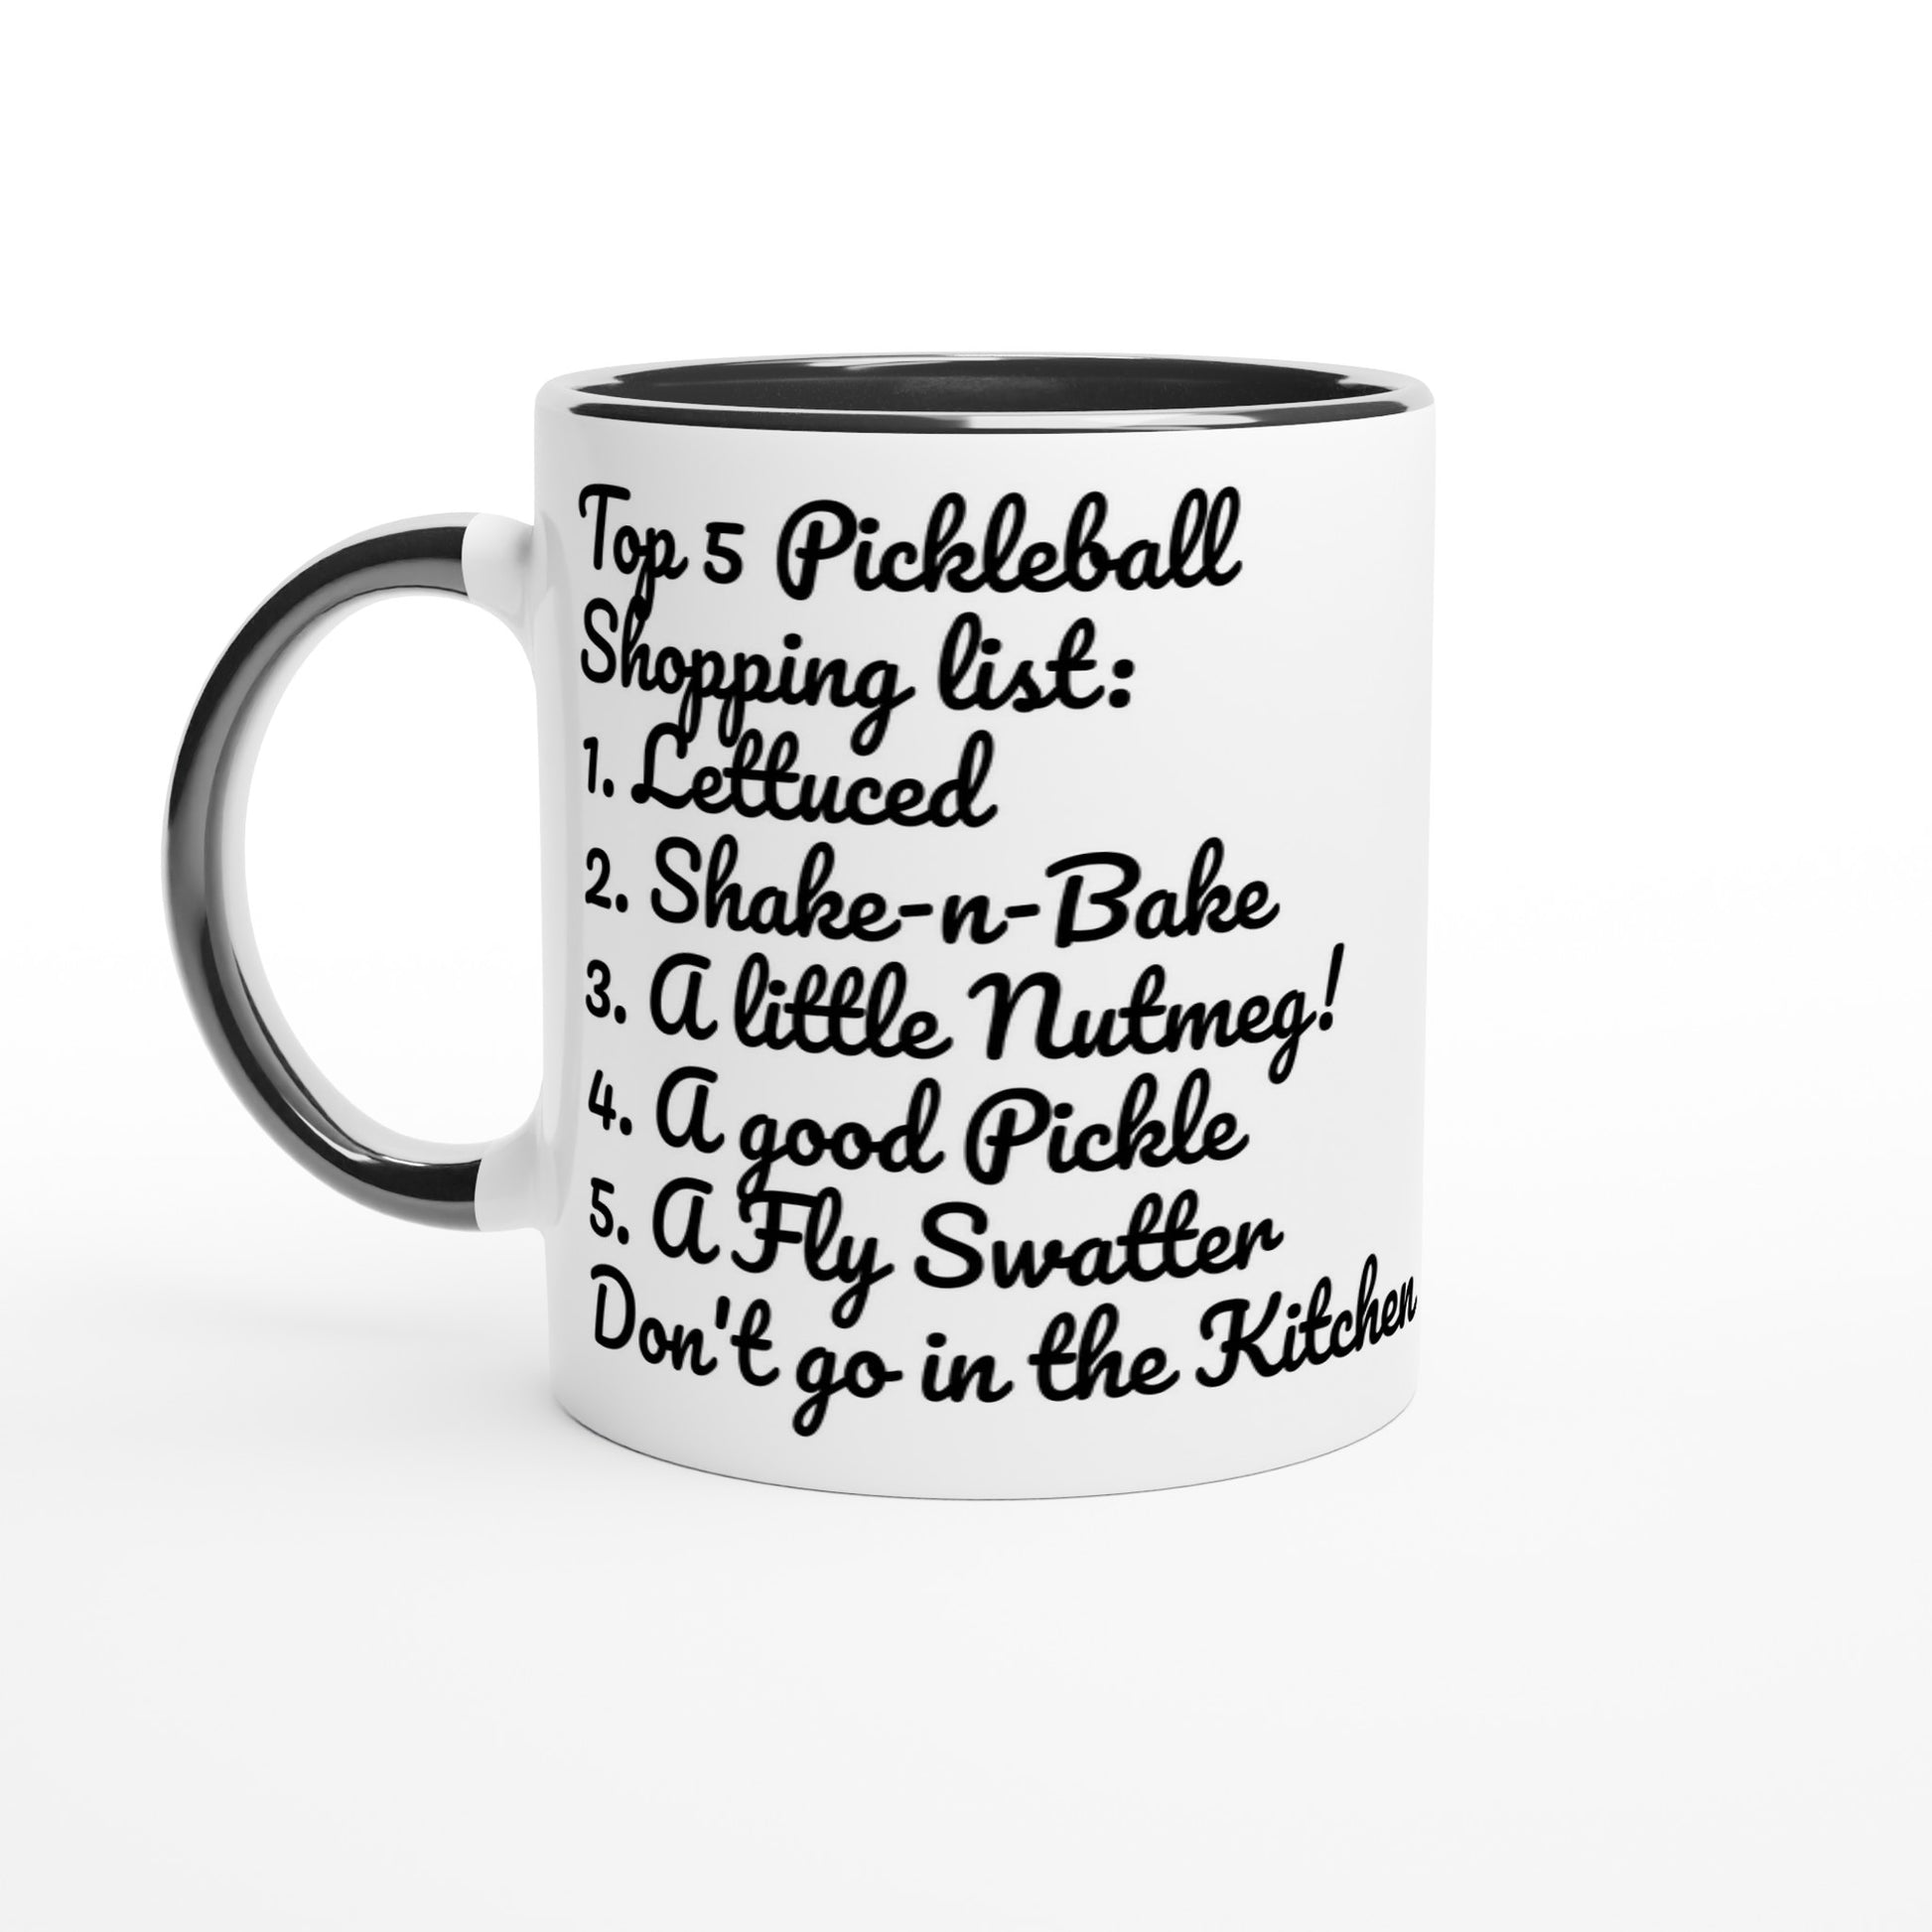 White ceramic 11oz mug with black handle original motto Top 5 Pickleball Shopping list lettuce, Shake-n-bake, Nutmeg, Pickle, a Fly Swatter Don’t go in the kitchen front side and Let's Play PickleBall logo on back dishwasher and microwave safe ceramic coffee mug from WhatYa Say Apparel front view.